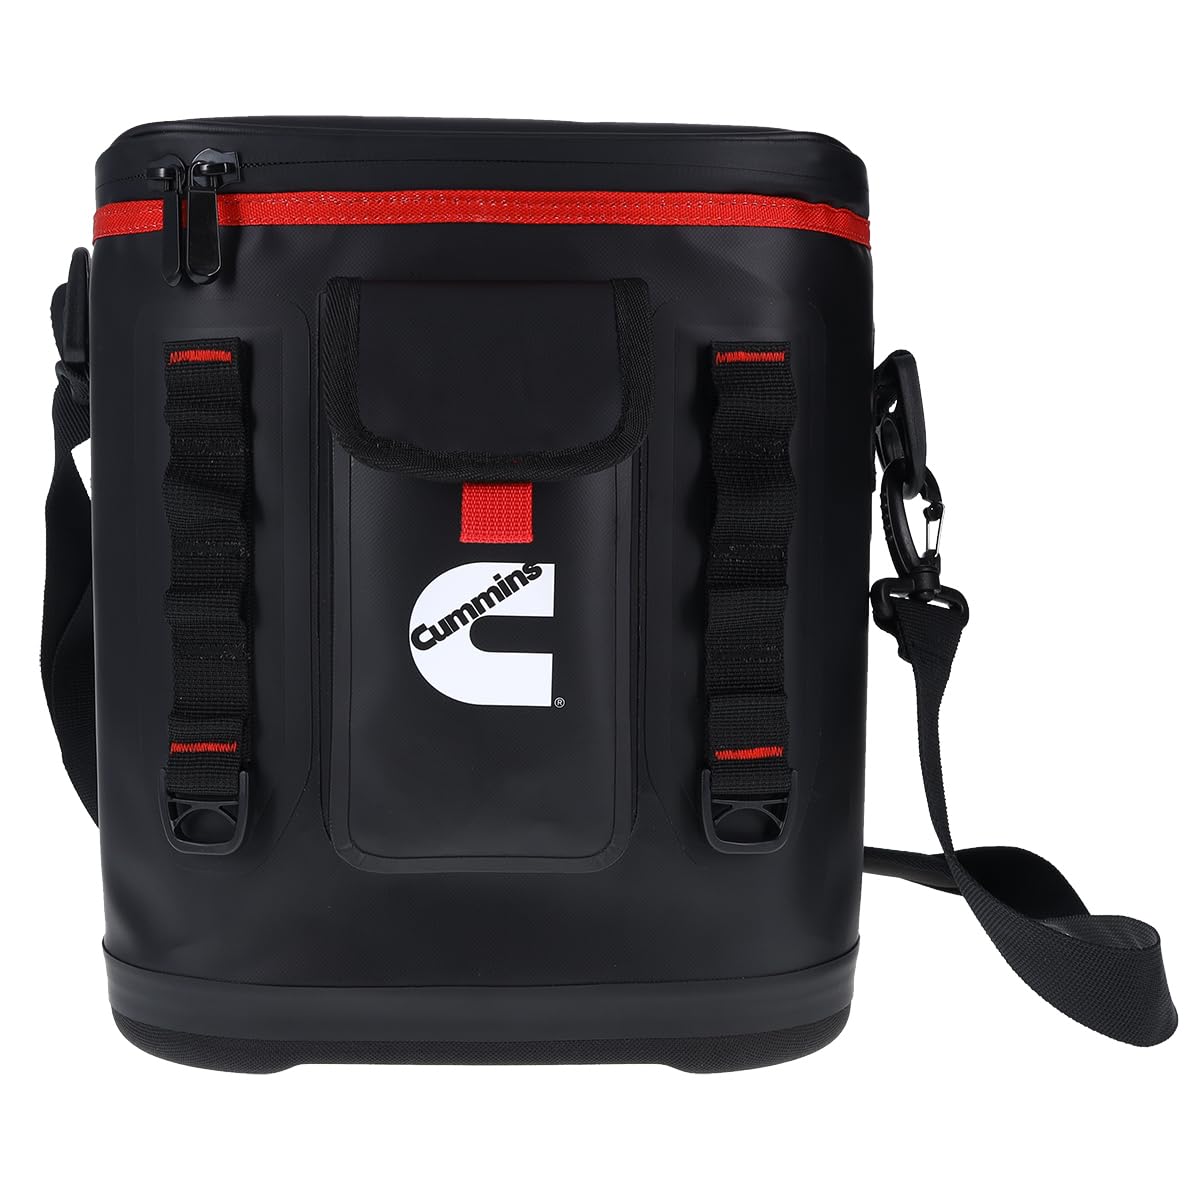 Cummins Portable Soft Cooler Bag CMN34718 12-Can Double-Laminated Insulated Cooler with Strap Ice Retention for Work Camp Beach 